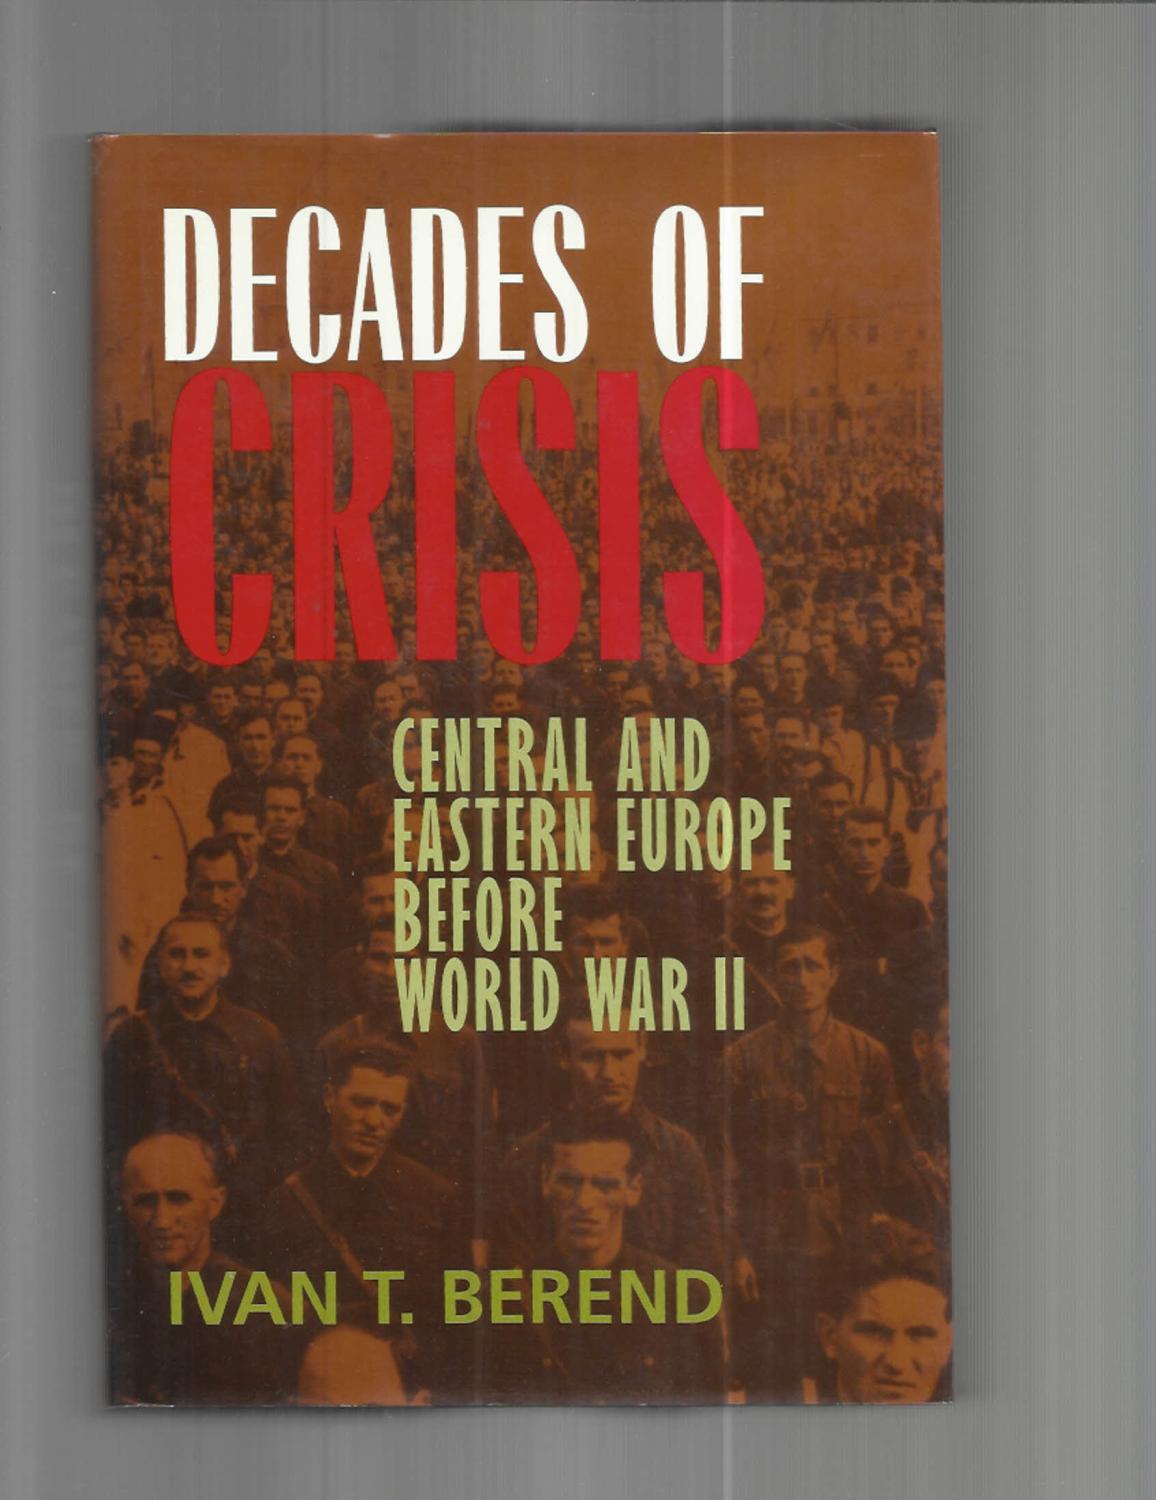 DECADES OF CRISIS: Central And Eastern Europe Before World War II. - Berend, Ivan T.